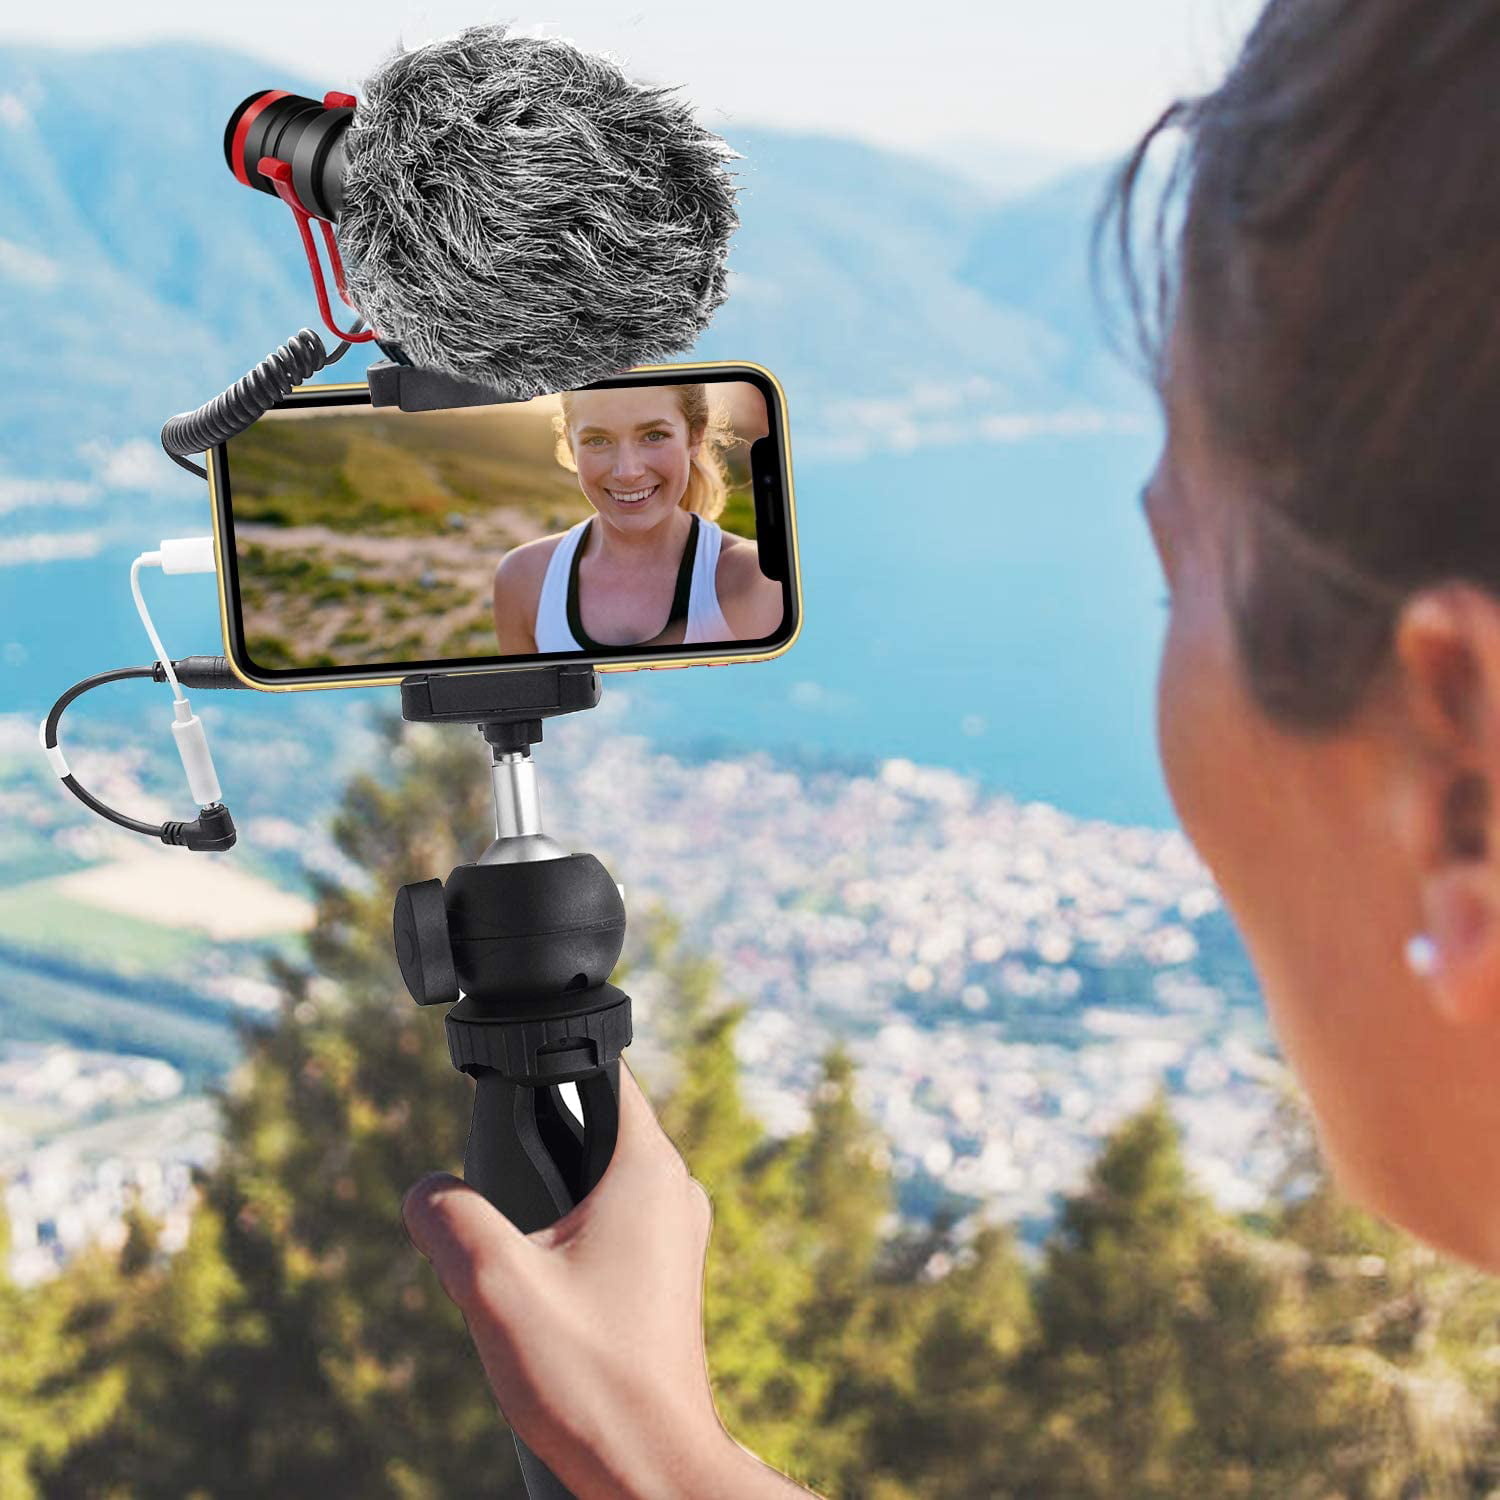 6S Smartphone Video Microphone with Mini Tripod Asmr Mic Perfect Vlog XR 6 Videomicro and Shotgun Microphone for iPhone 5S X YouTube iPhone Camera Video Kit XS Max Samsung Google 8 7 